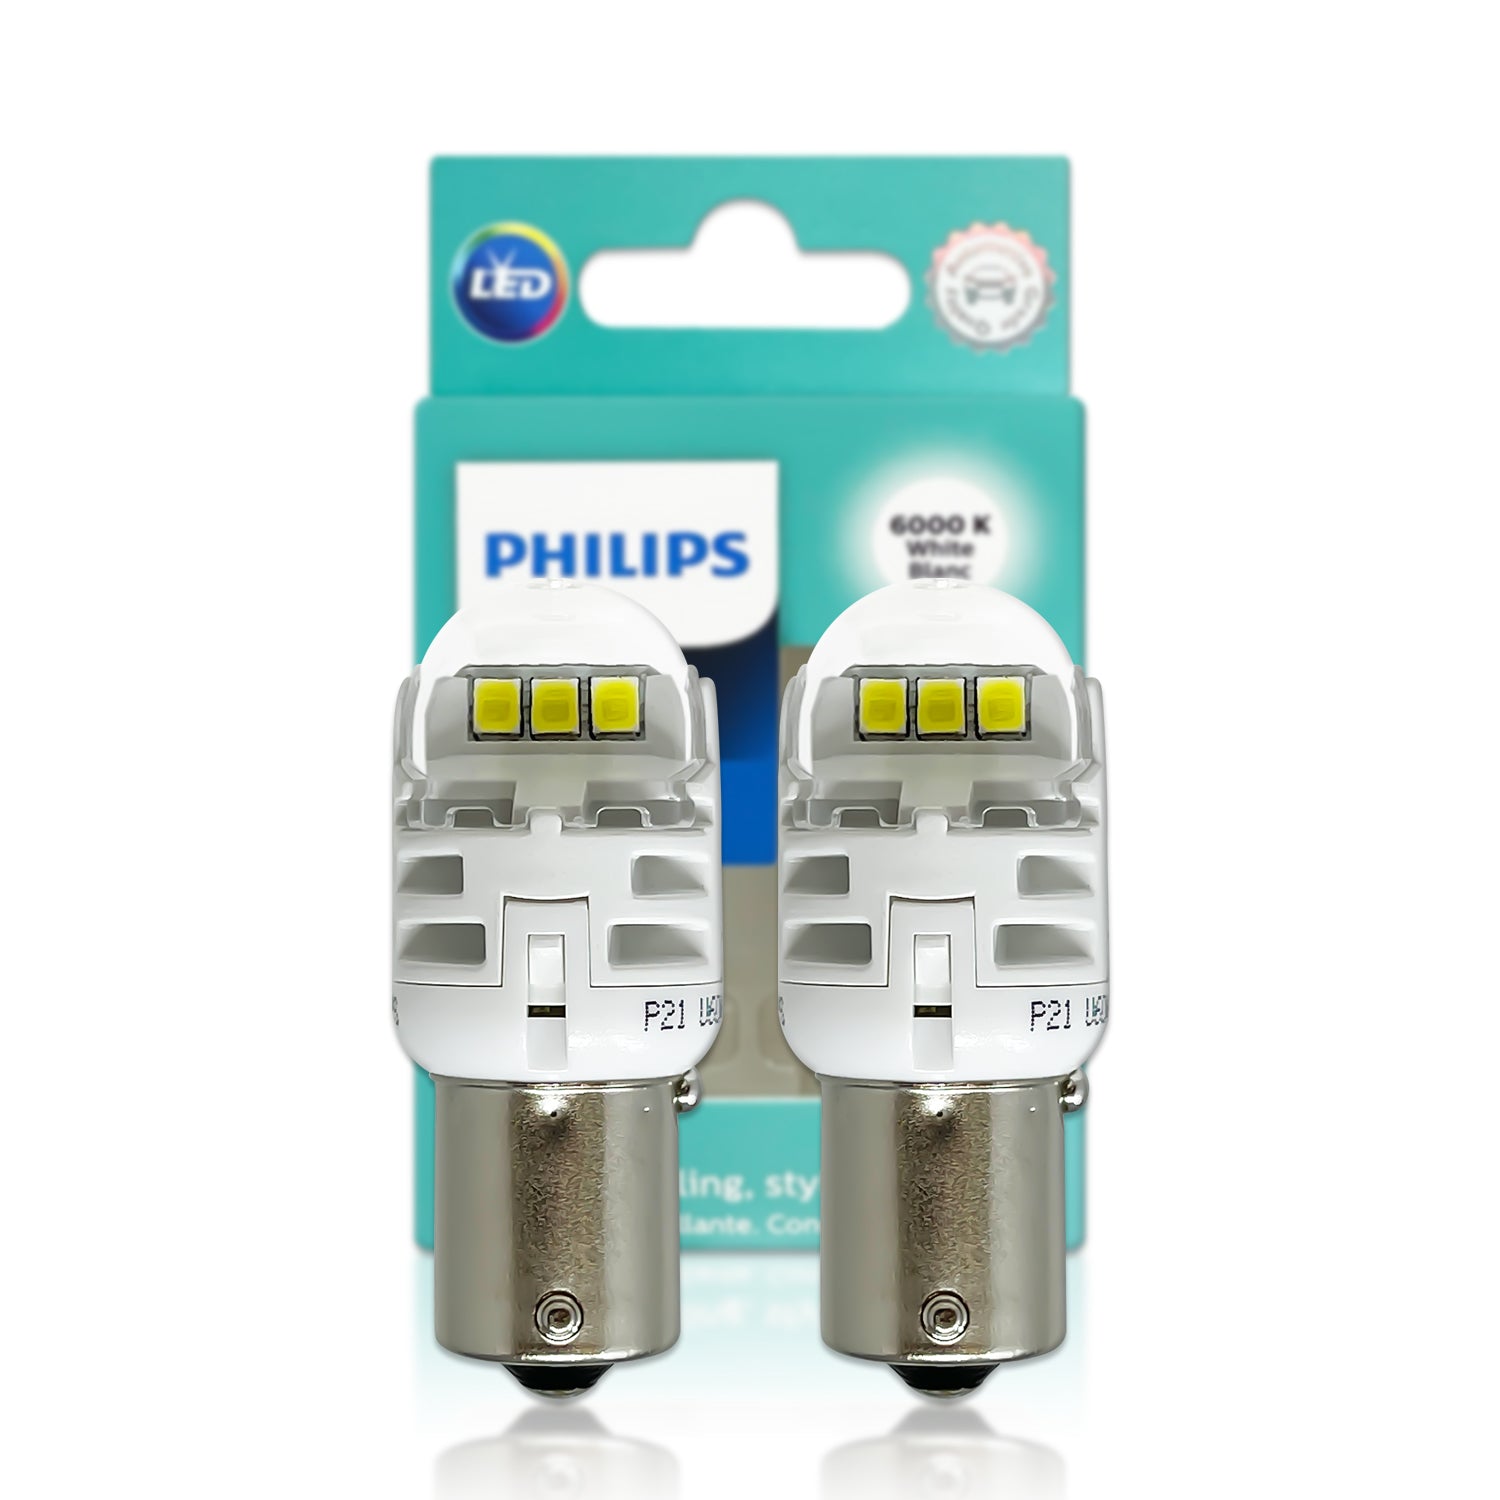 Philips 1156 Red LED P21W Stop and Tail automotive light - 2 Bulbs 